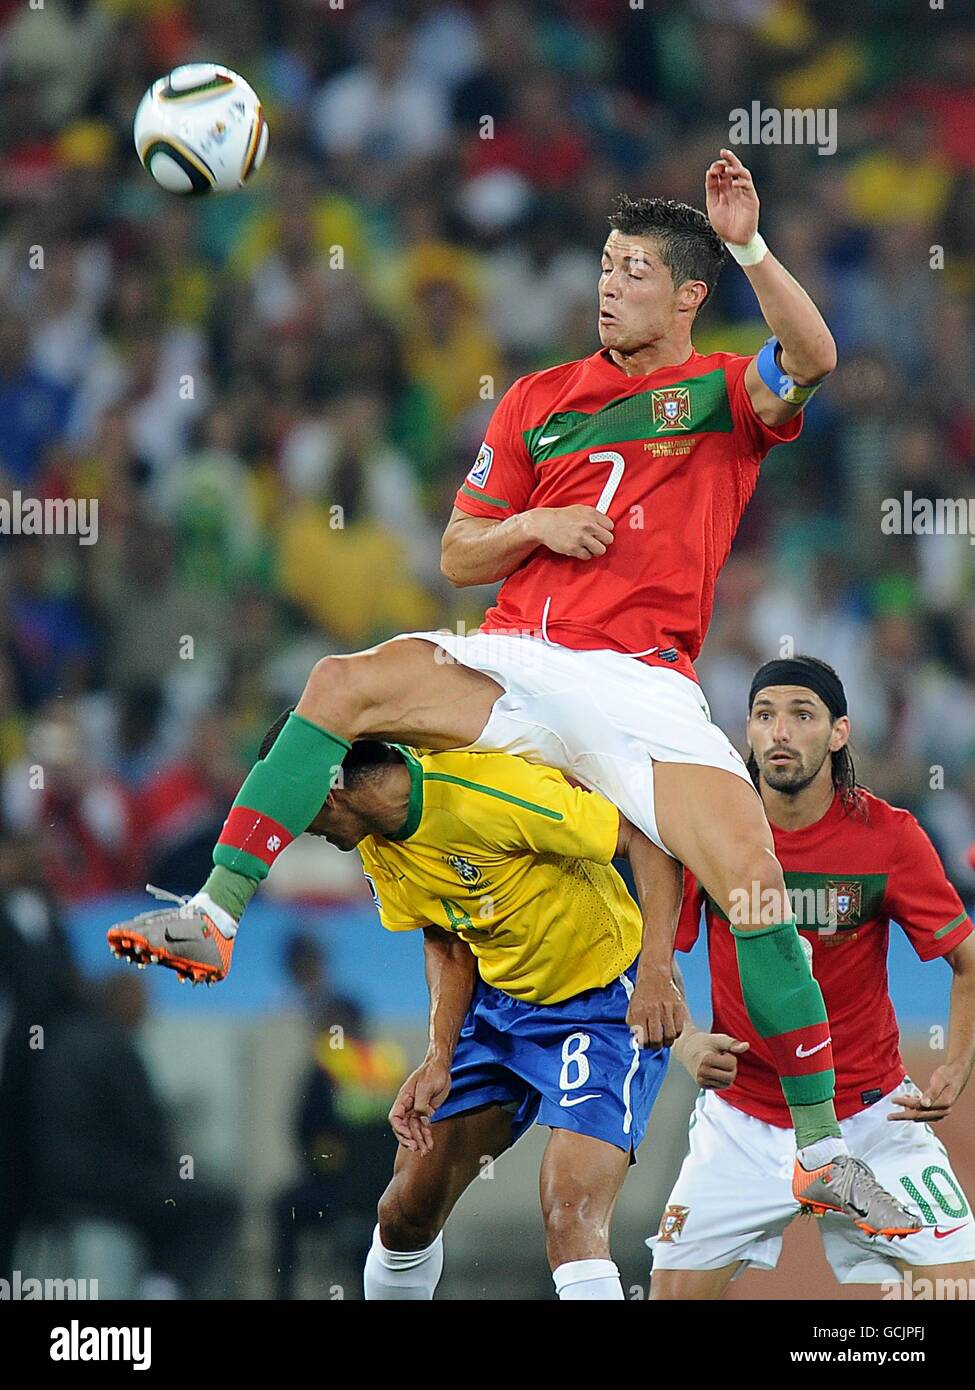 Soccer - 2010 FIFA World Cup South Africa - Group G - Portugal v Brazil - Durban Stadium. Brazil's Gilberto Silva (bottom) and Portugal's Cristiano Ronaldo (top) battle for the ball in the air Stock Photo